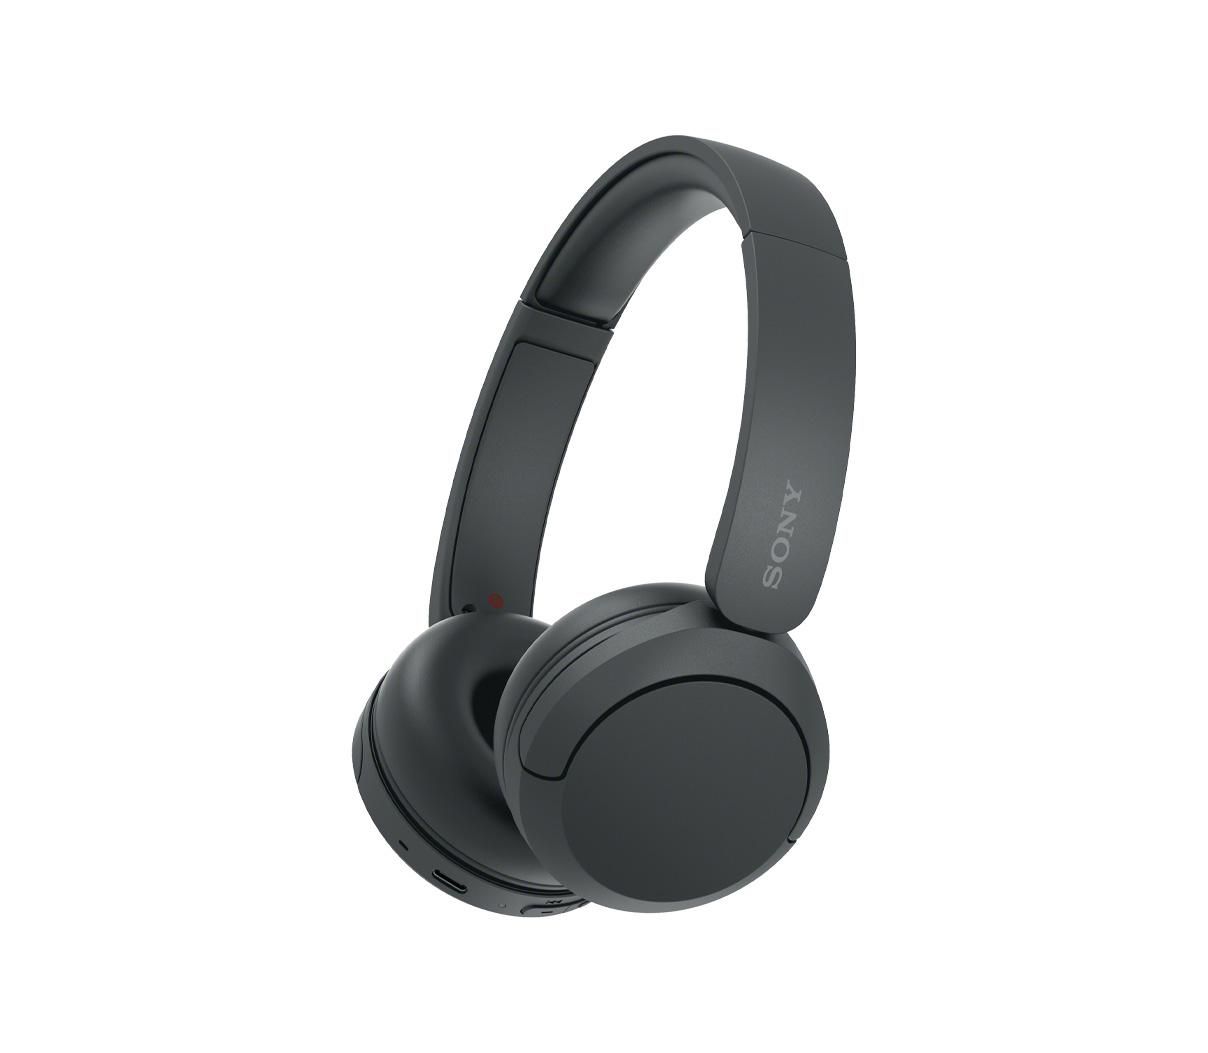  Sony ZX Series Wired On-Ear Headphones, Black MDR-ZX110  (Packaging may vary) : Electronics